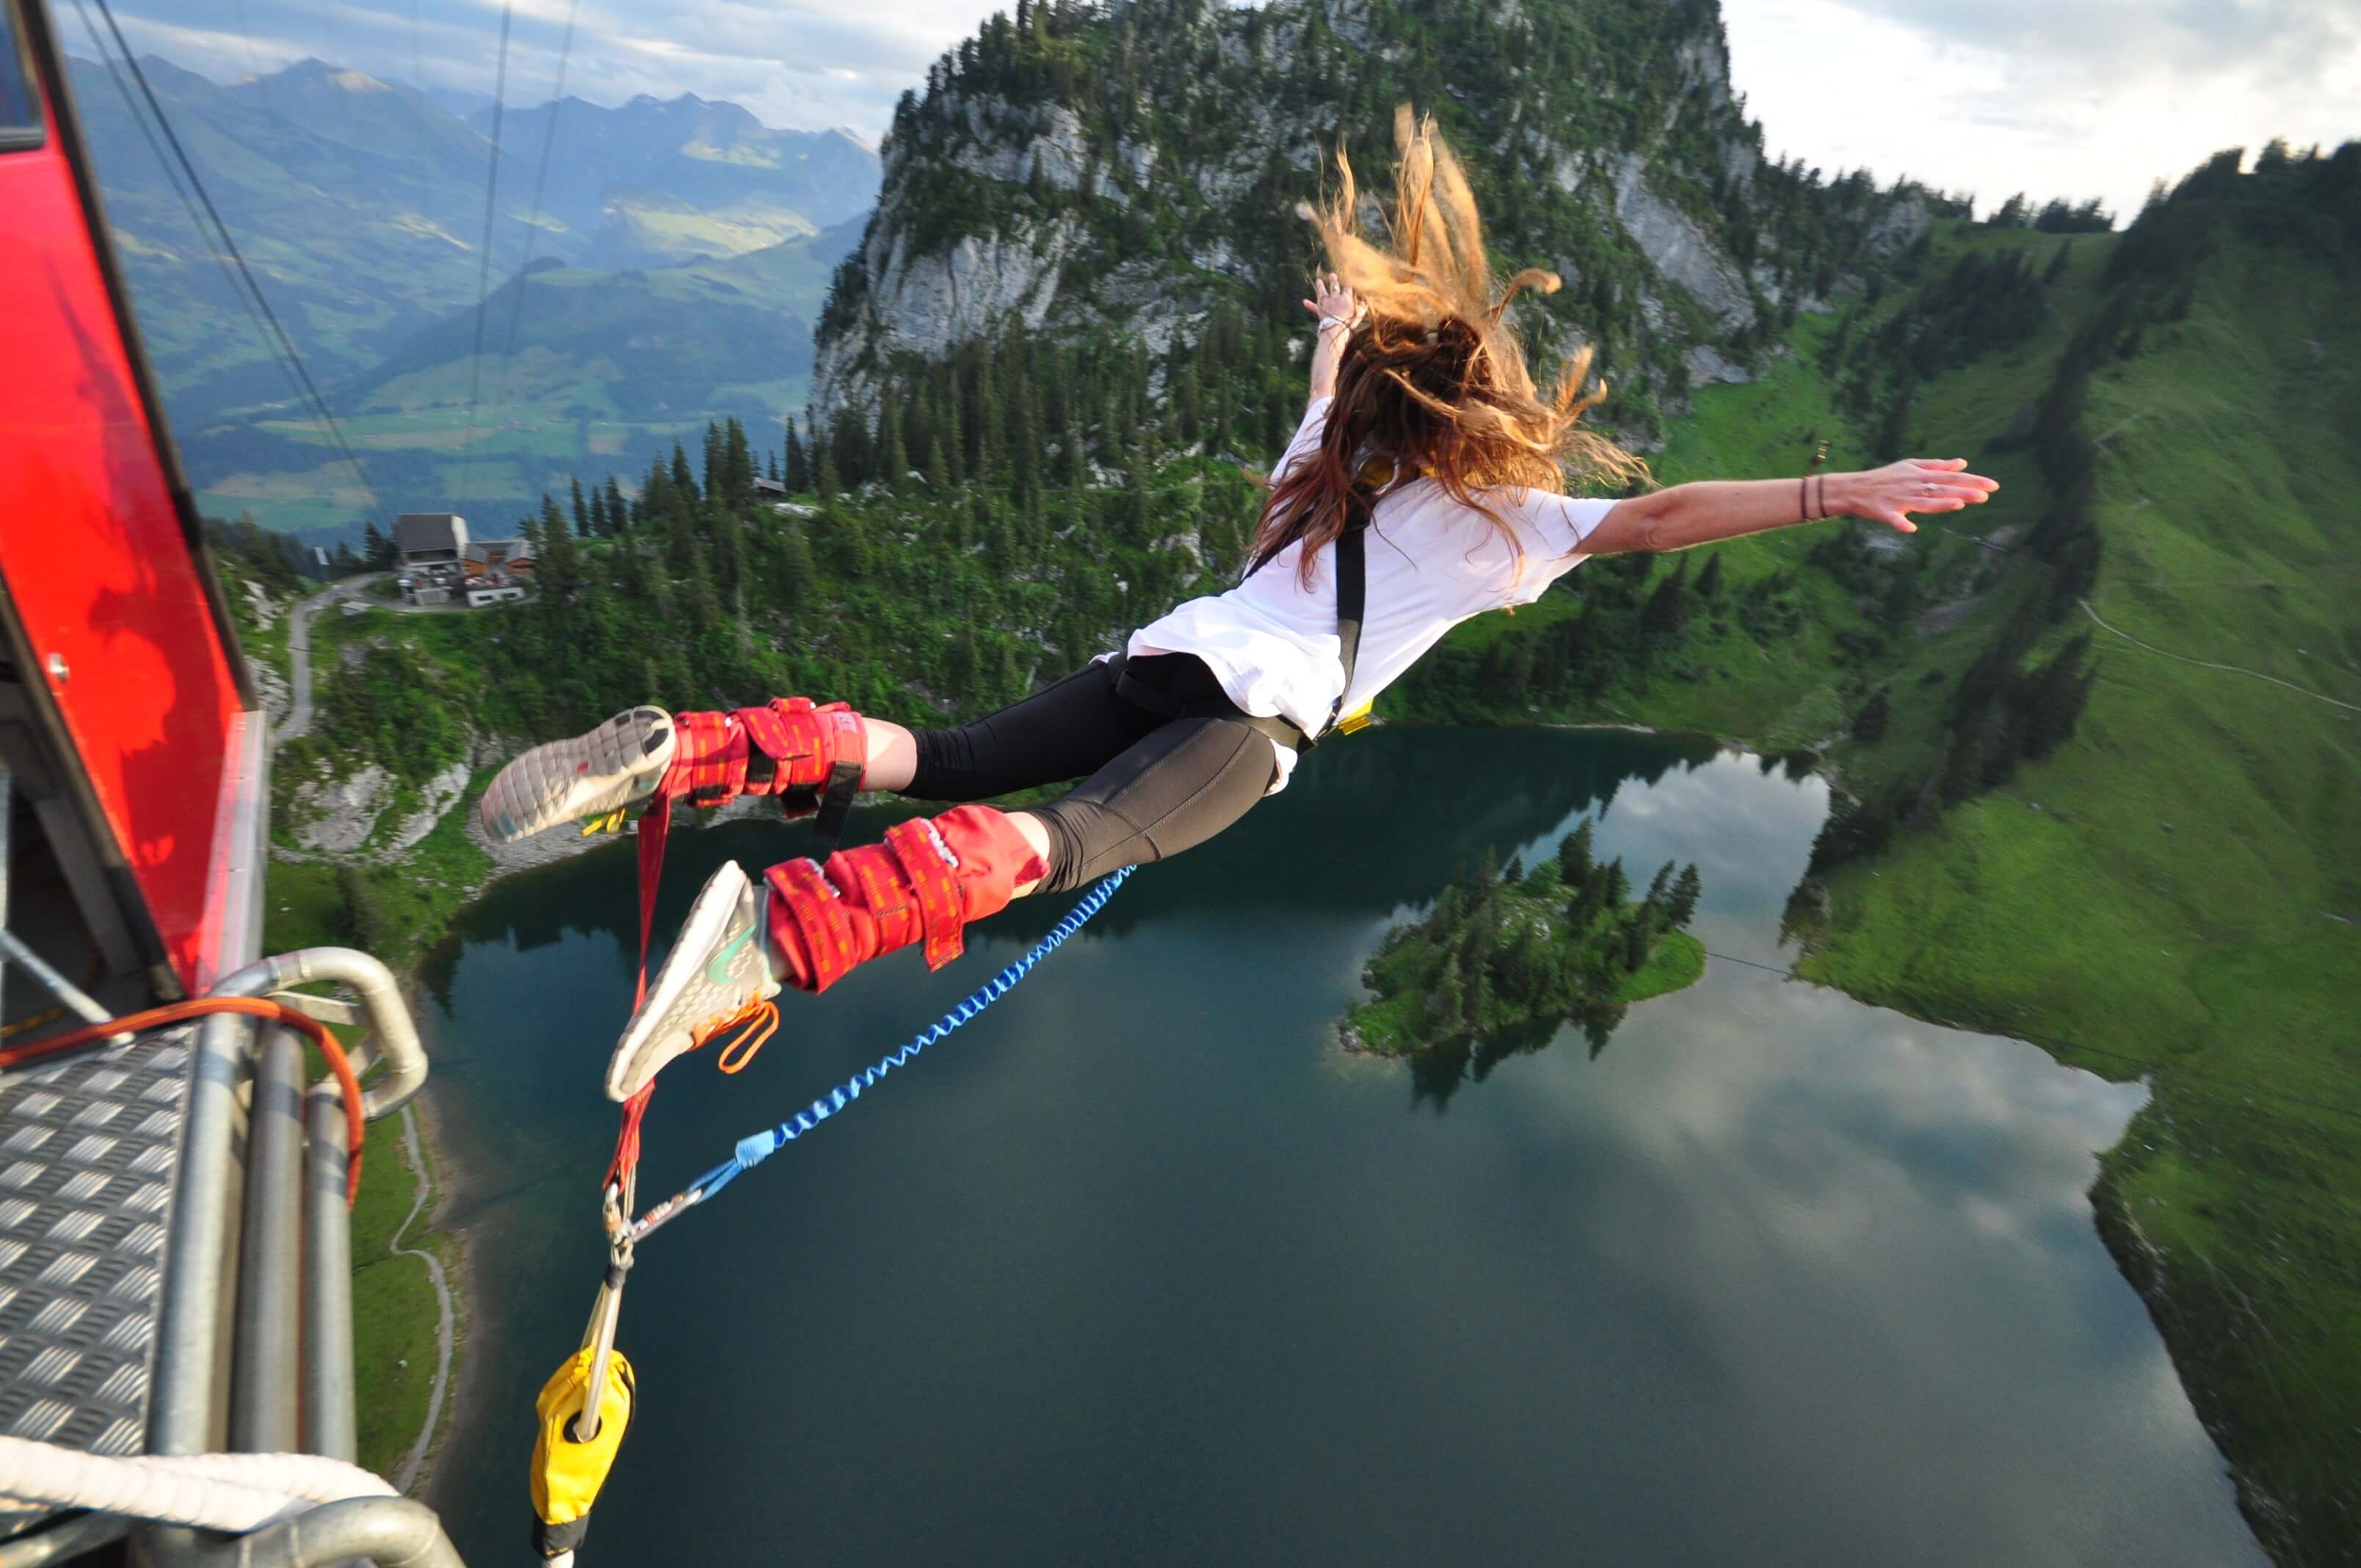 Bungee Jumping: Extreme sport at the Stockhorn mountain of the Bernese Alps, Interlaken, Switzerland. 3220x2140 HD Wallpaper.